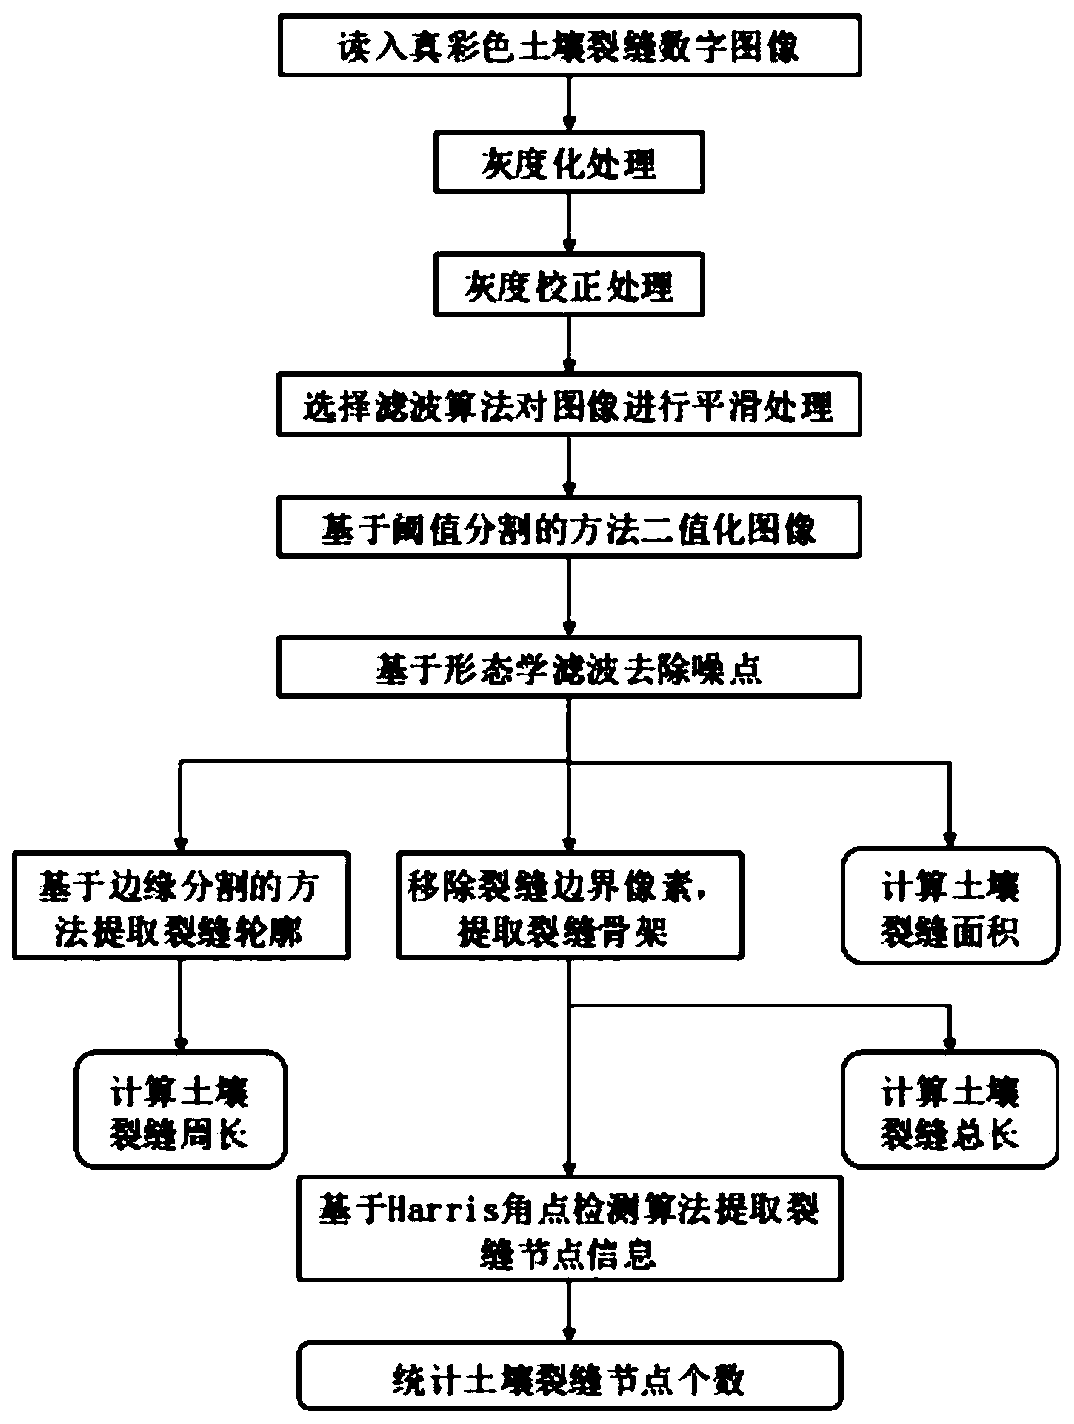 Soil crack feature information extraction method